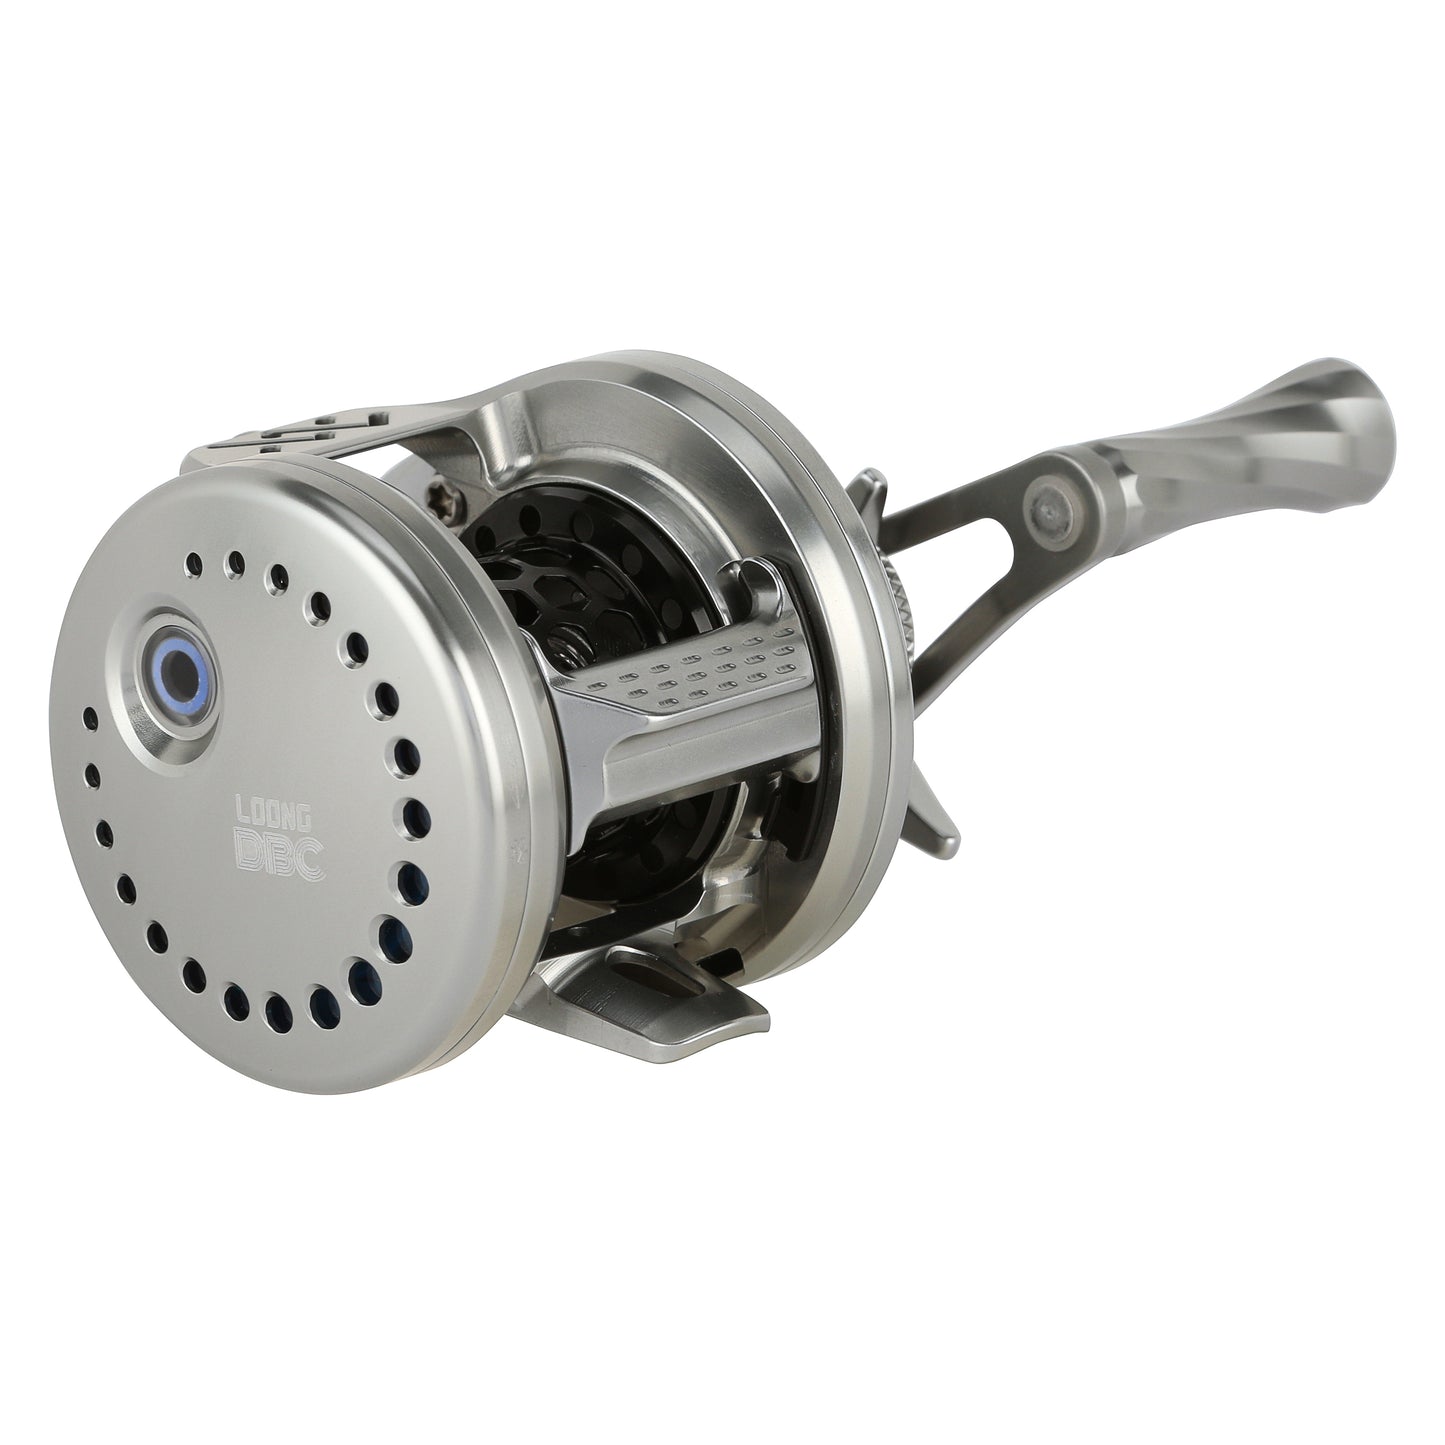 Loongze USA - DBC BFS Fishing Reel- The new standard for smart brakes 